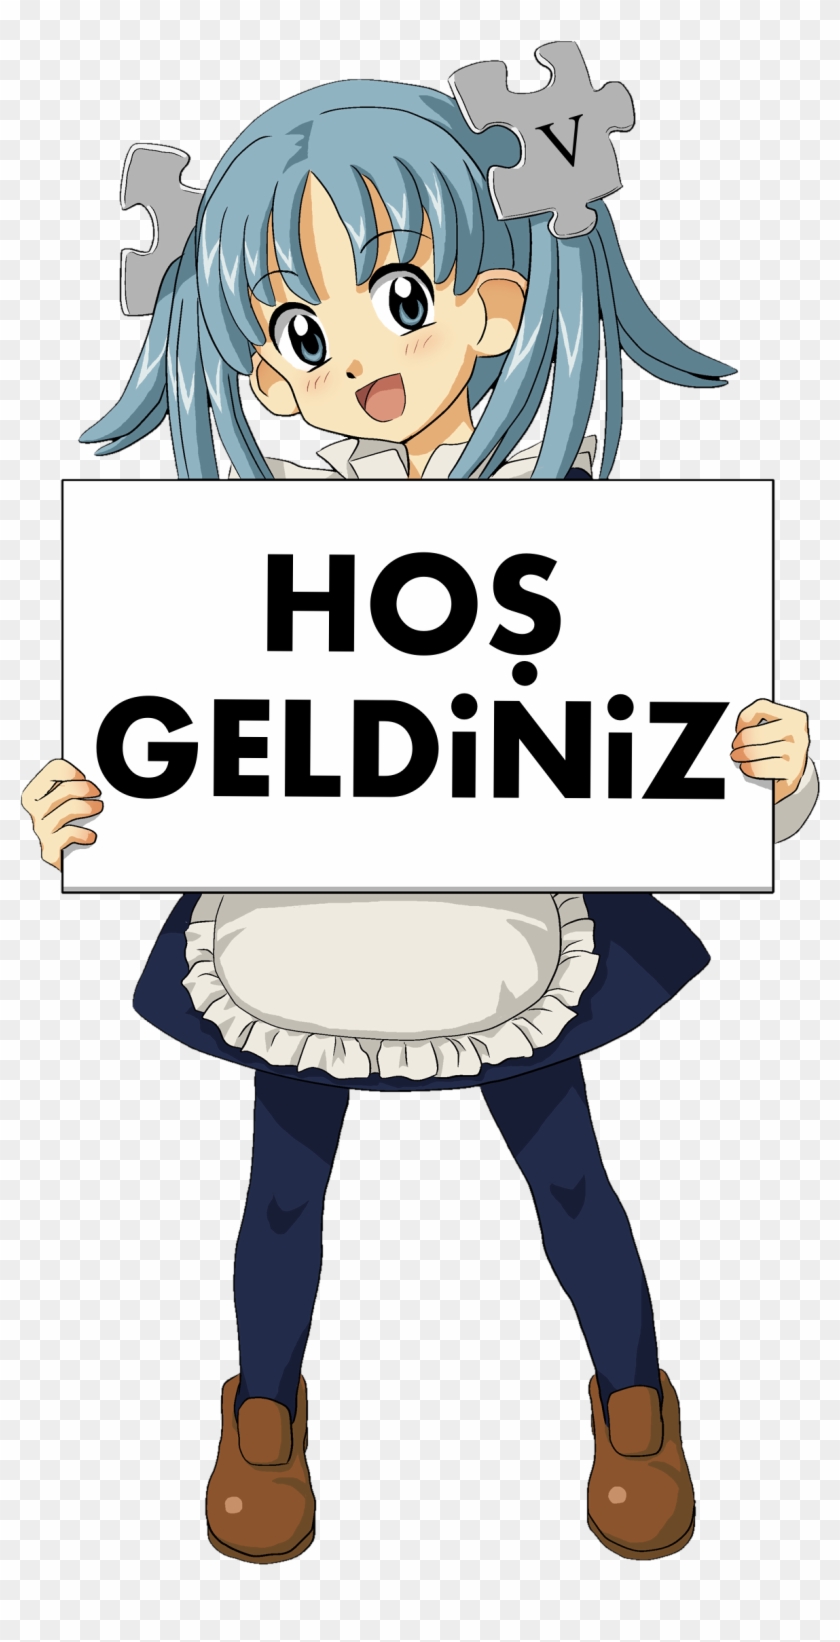 Wikipe Tan Holding A Welcome Sign Tr - Holding A Sign Clipart #1425483